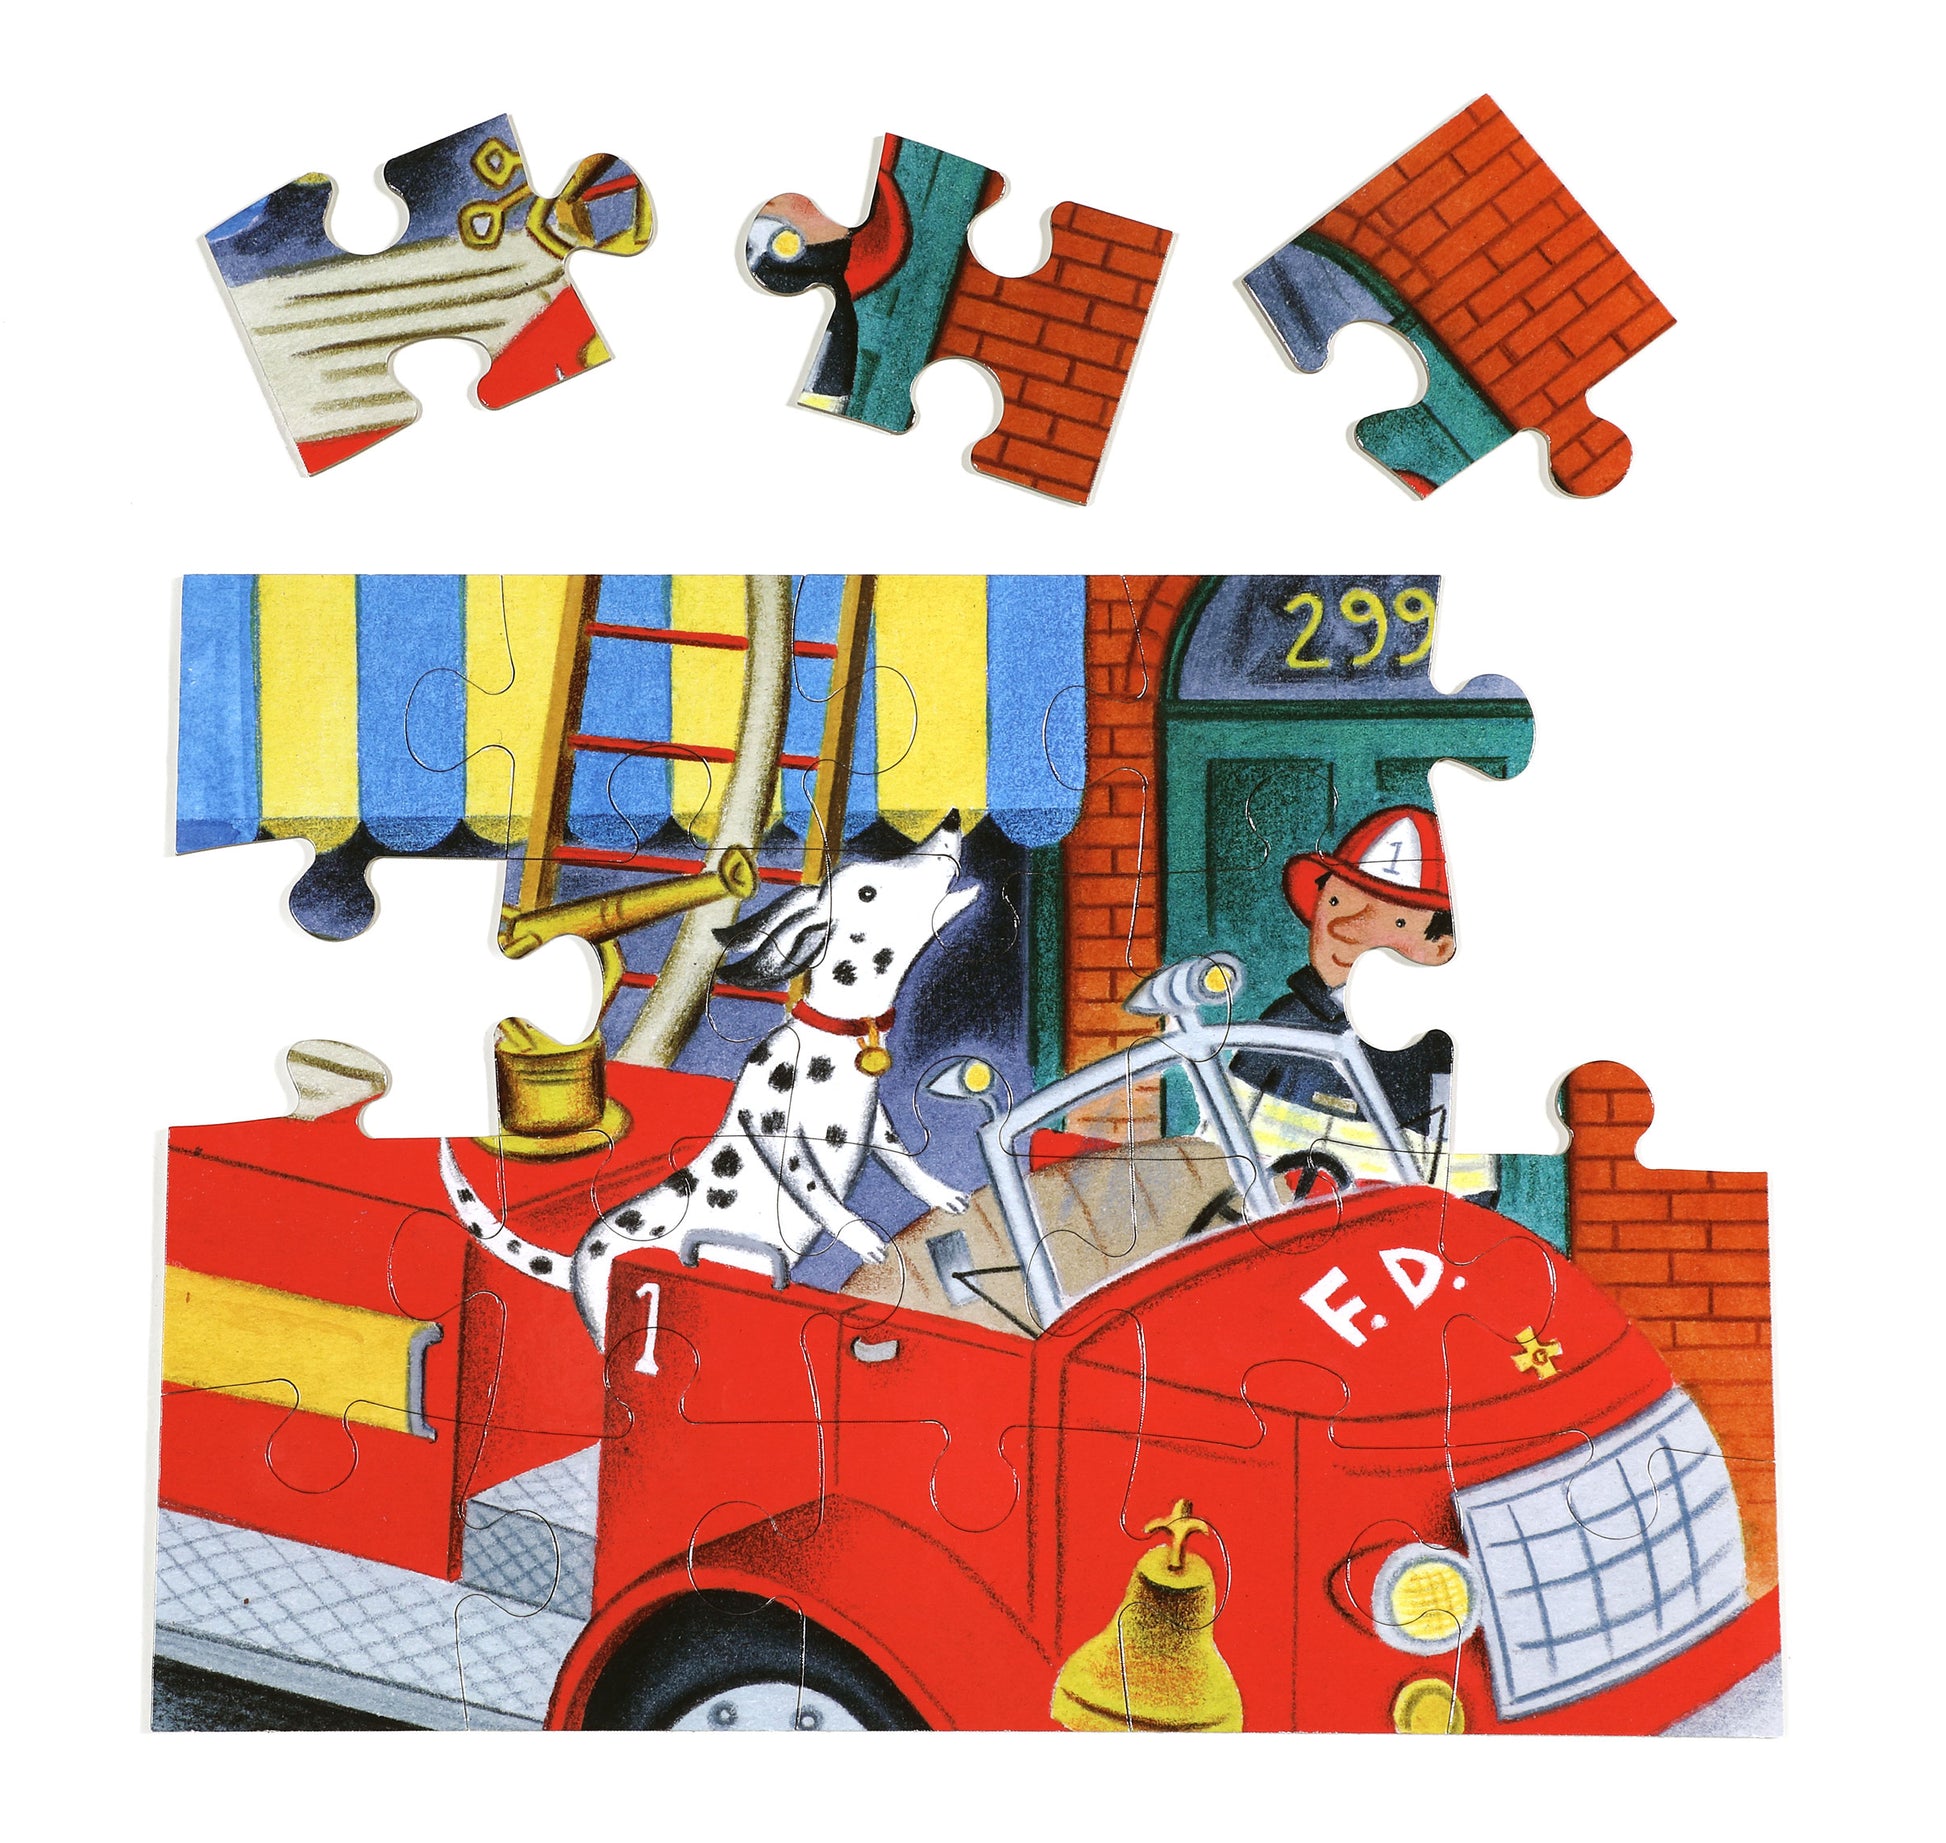 Red Fire Truck 20 Piece Big Puzzle eeBoo Unique Gifts for Kids Ages 3+